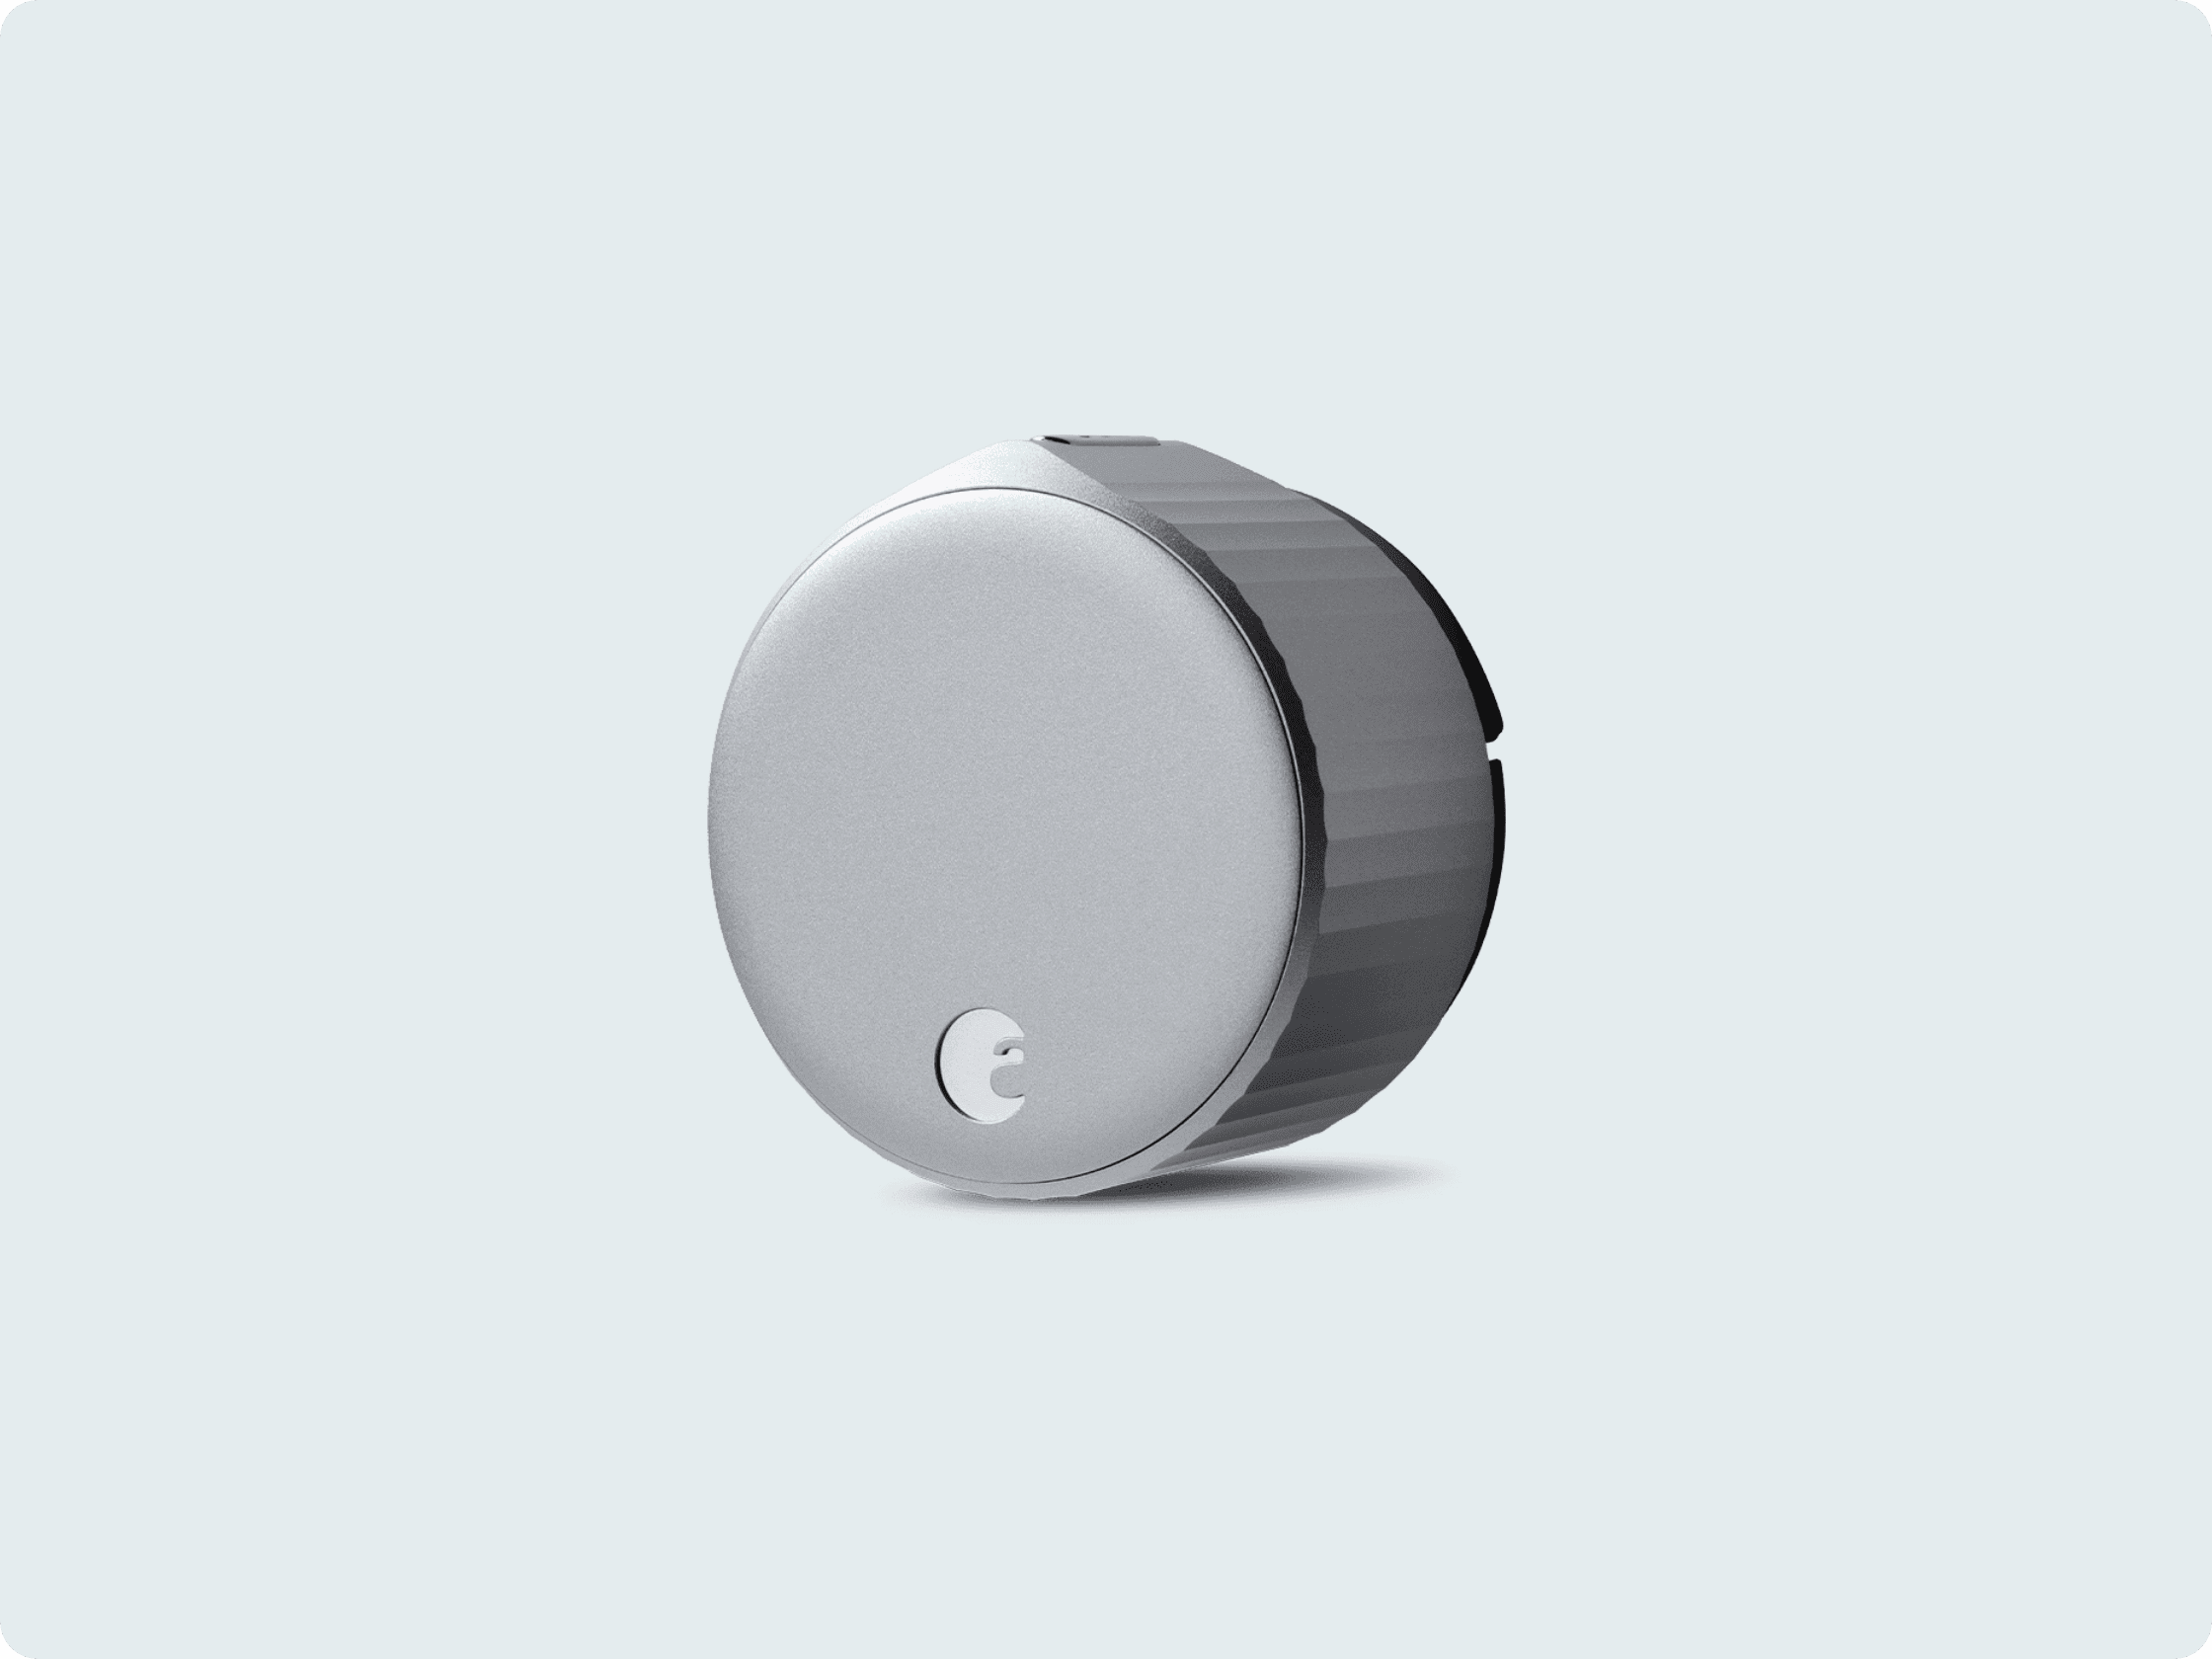 The new August Wi-Fi Smart lock is 45 percent leaner than the August Smart Lock Pro